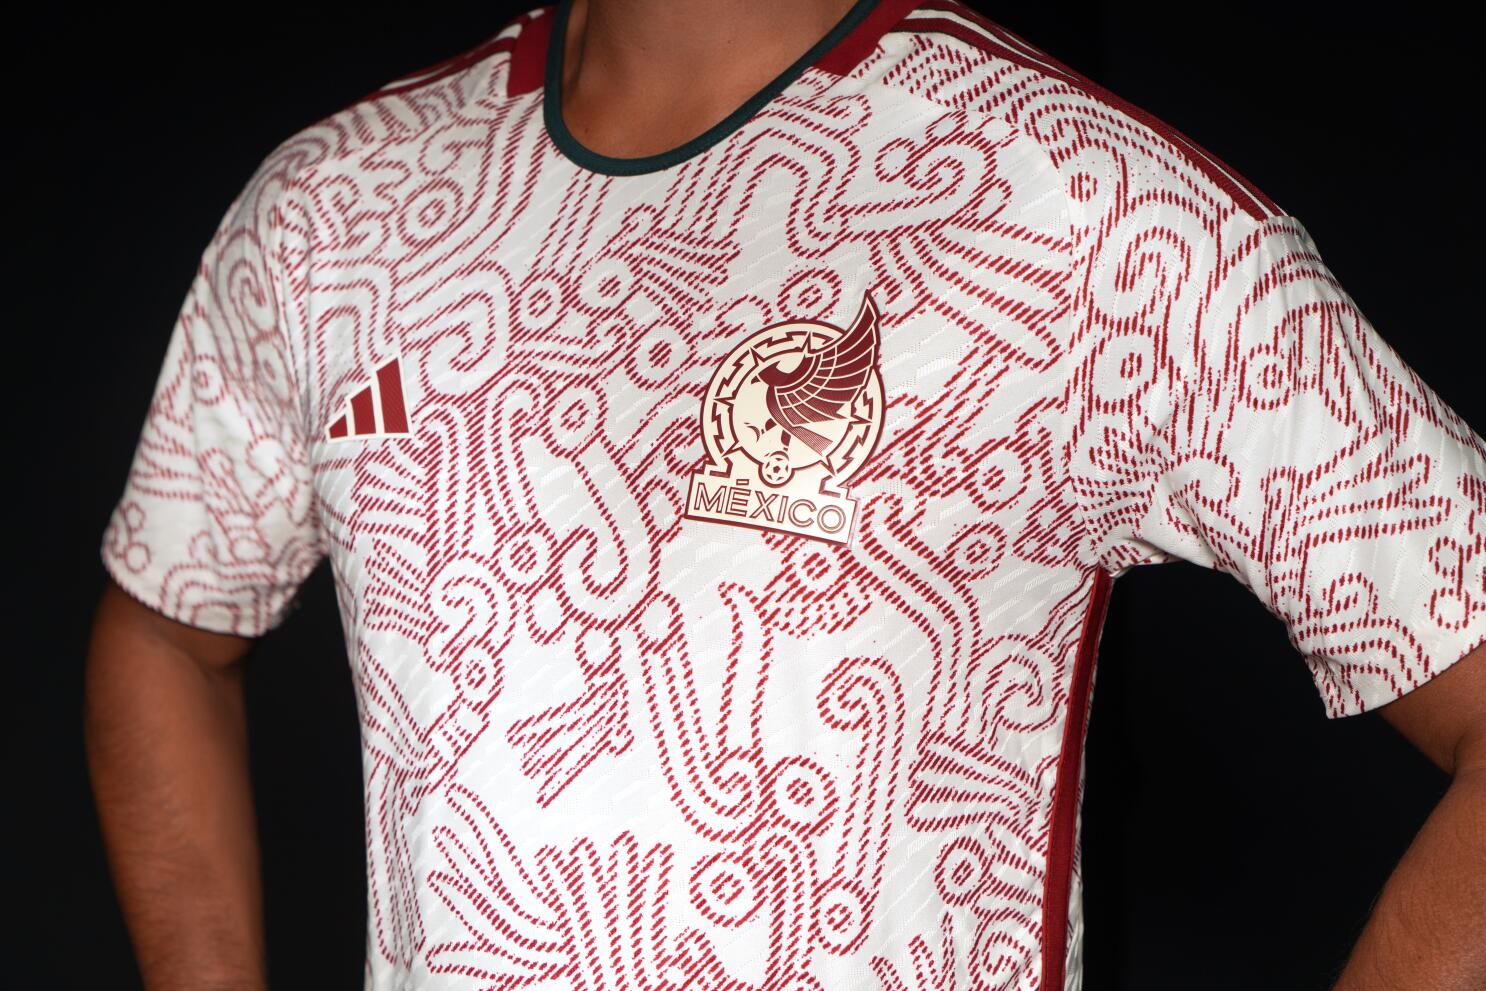 Mexico unveils symbolic away kit for this fall's World Cup - Los